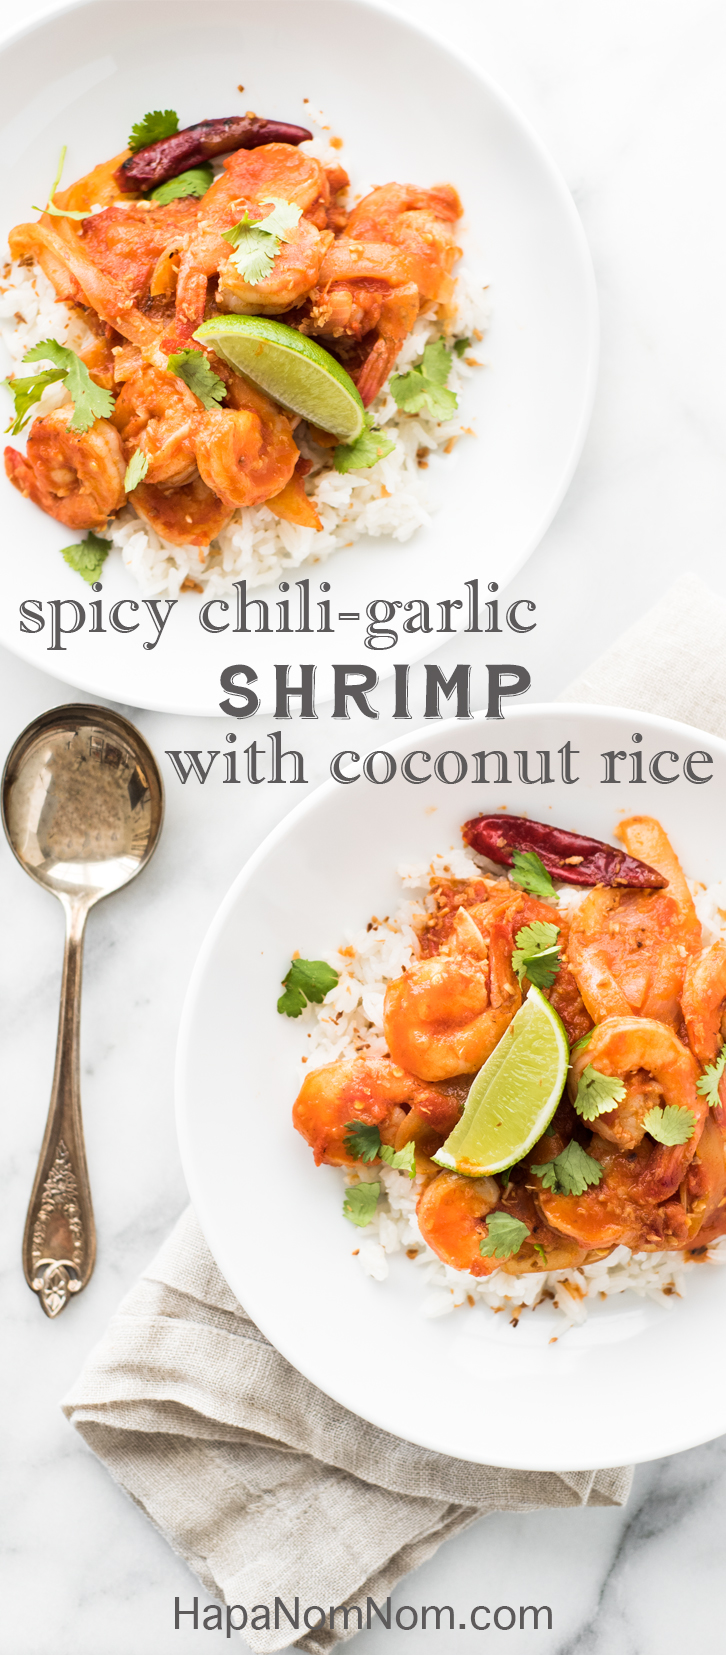 Lime, Coconut, & Shrimp - the Trifecta is Compete in This Burmese-Inspired Spicy Chili Garlic Shrimp with Coconut Rice and a Squeeze of Fresh Lime. Healthy and Totally Delicious!